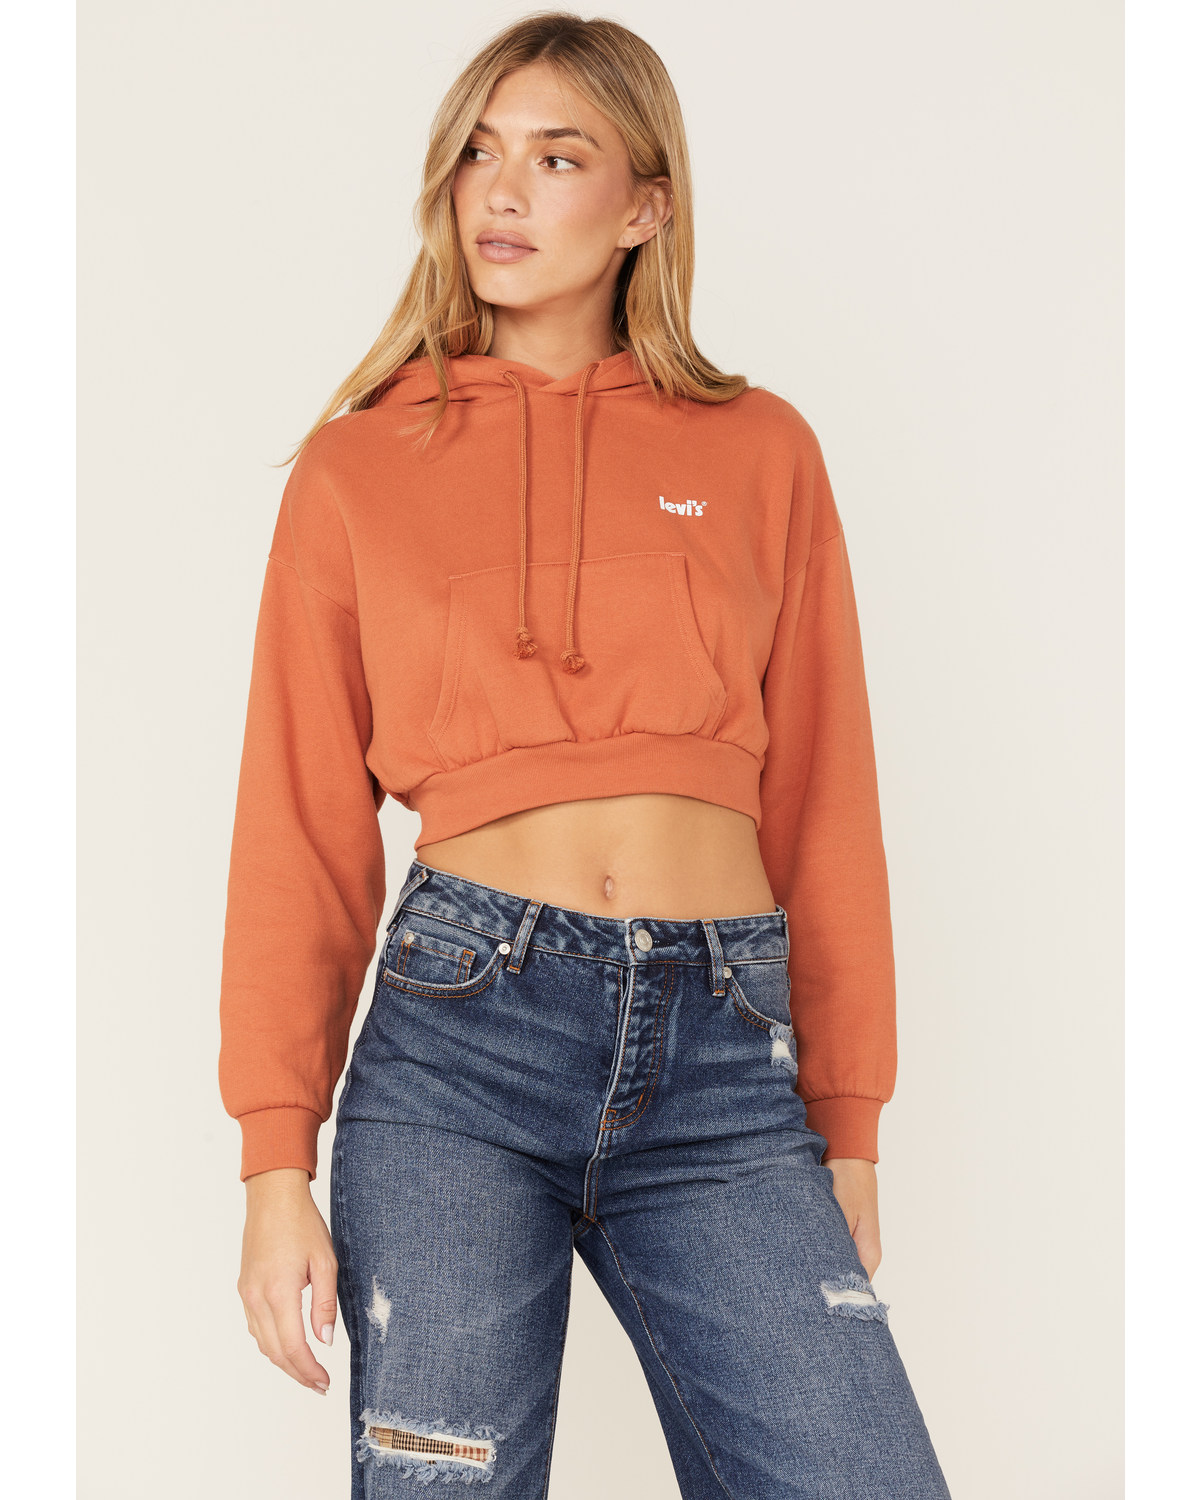 Levi's Women's Laundry Day Cropped Hoodie